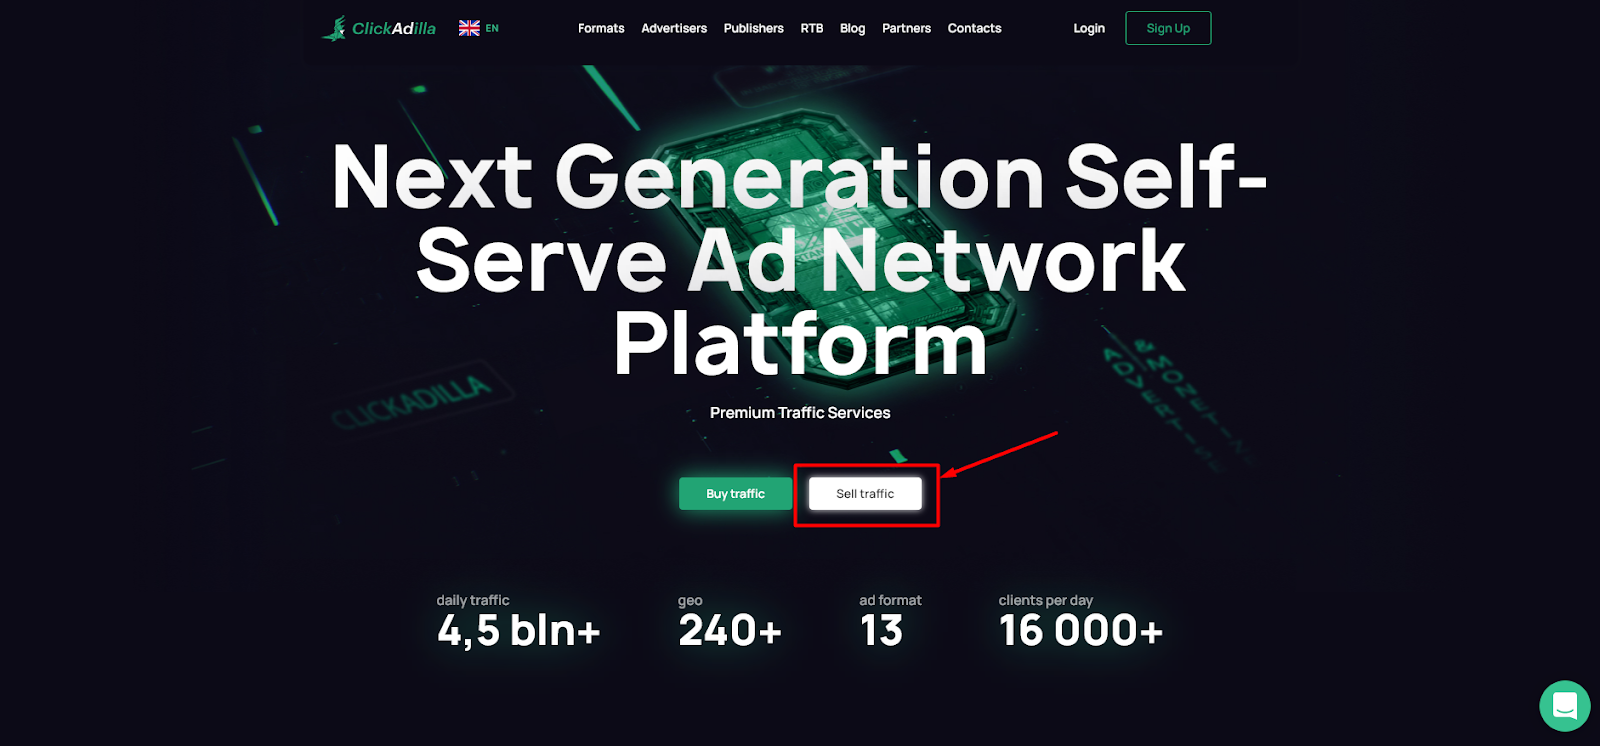 ClickAdilla Ad Network Review - High-Technology Self Serve Ad Network